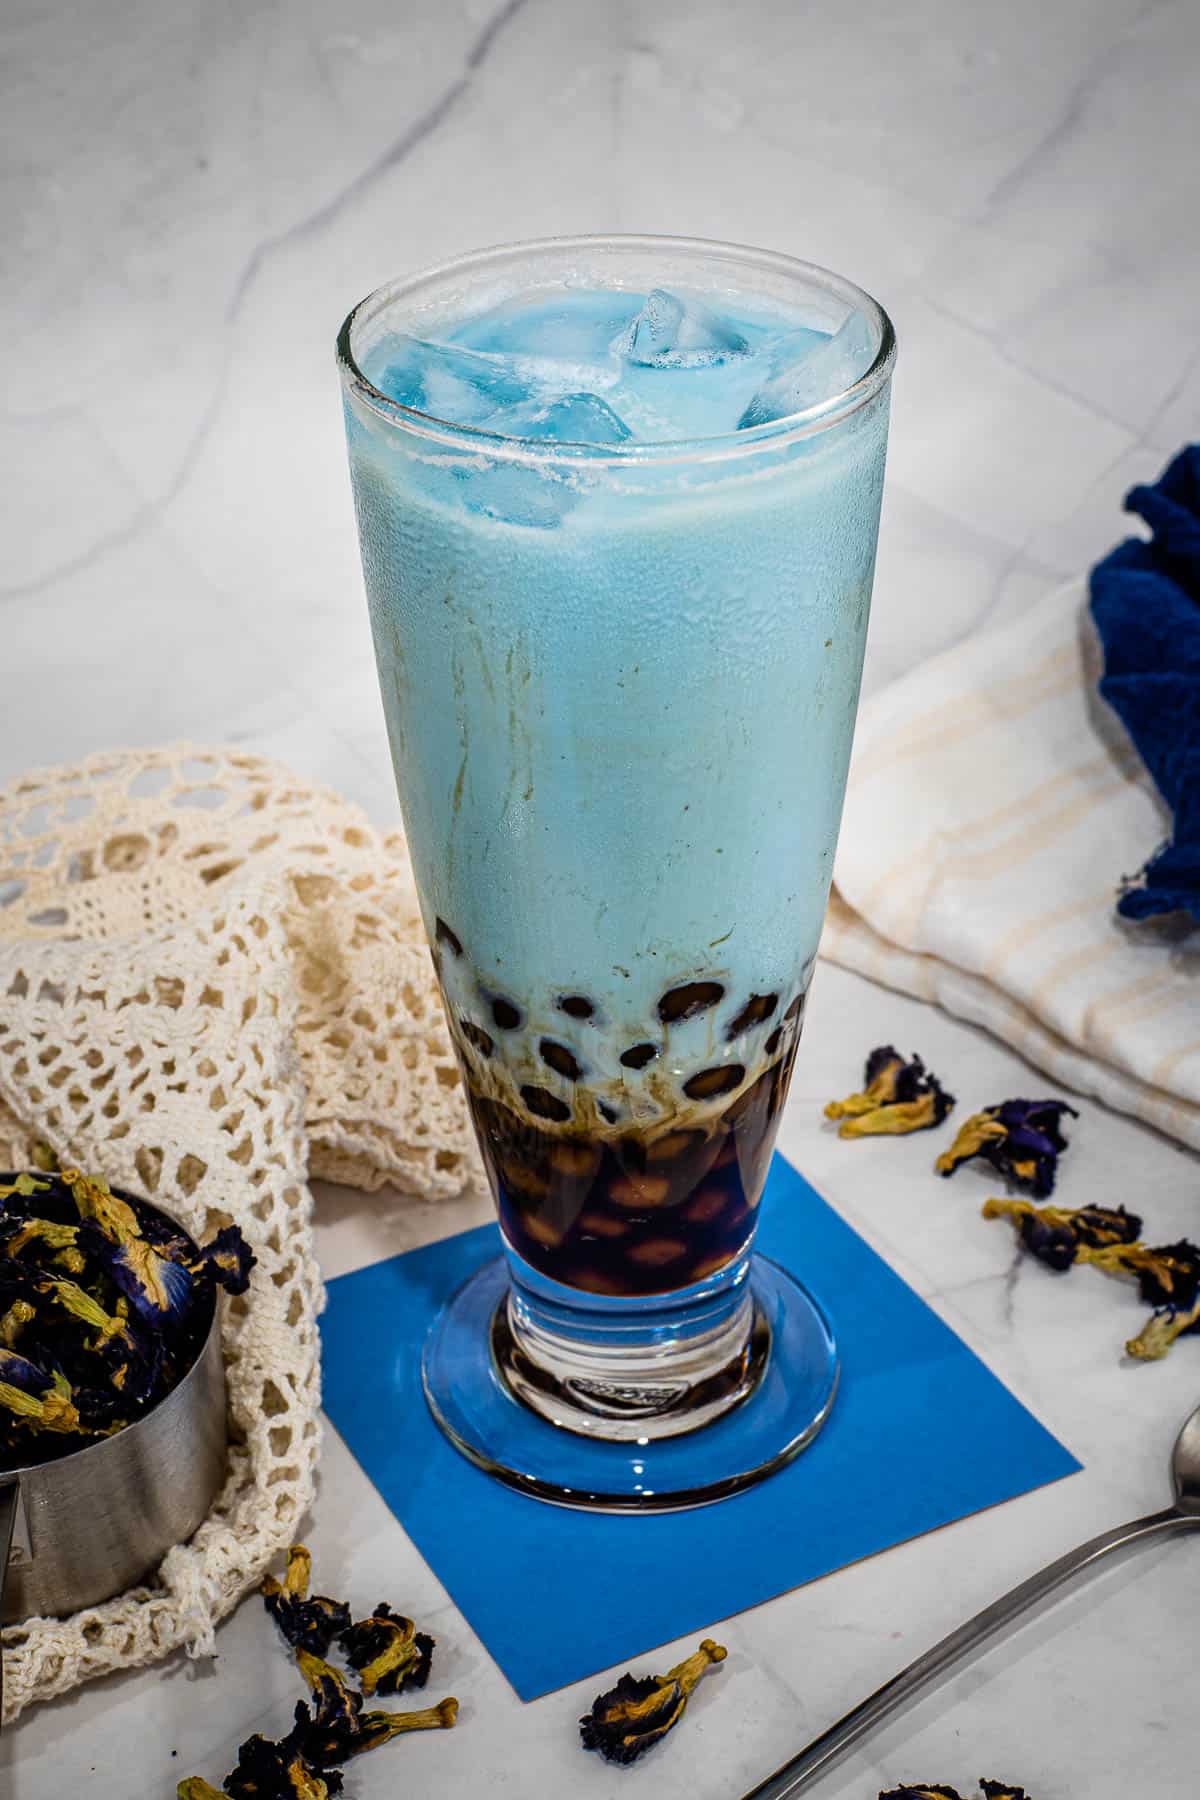 A glass of iced butterfly pea flower milk tea with boba pearls.